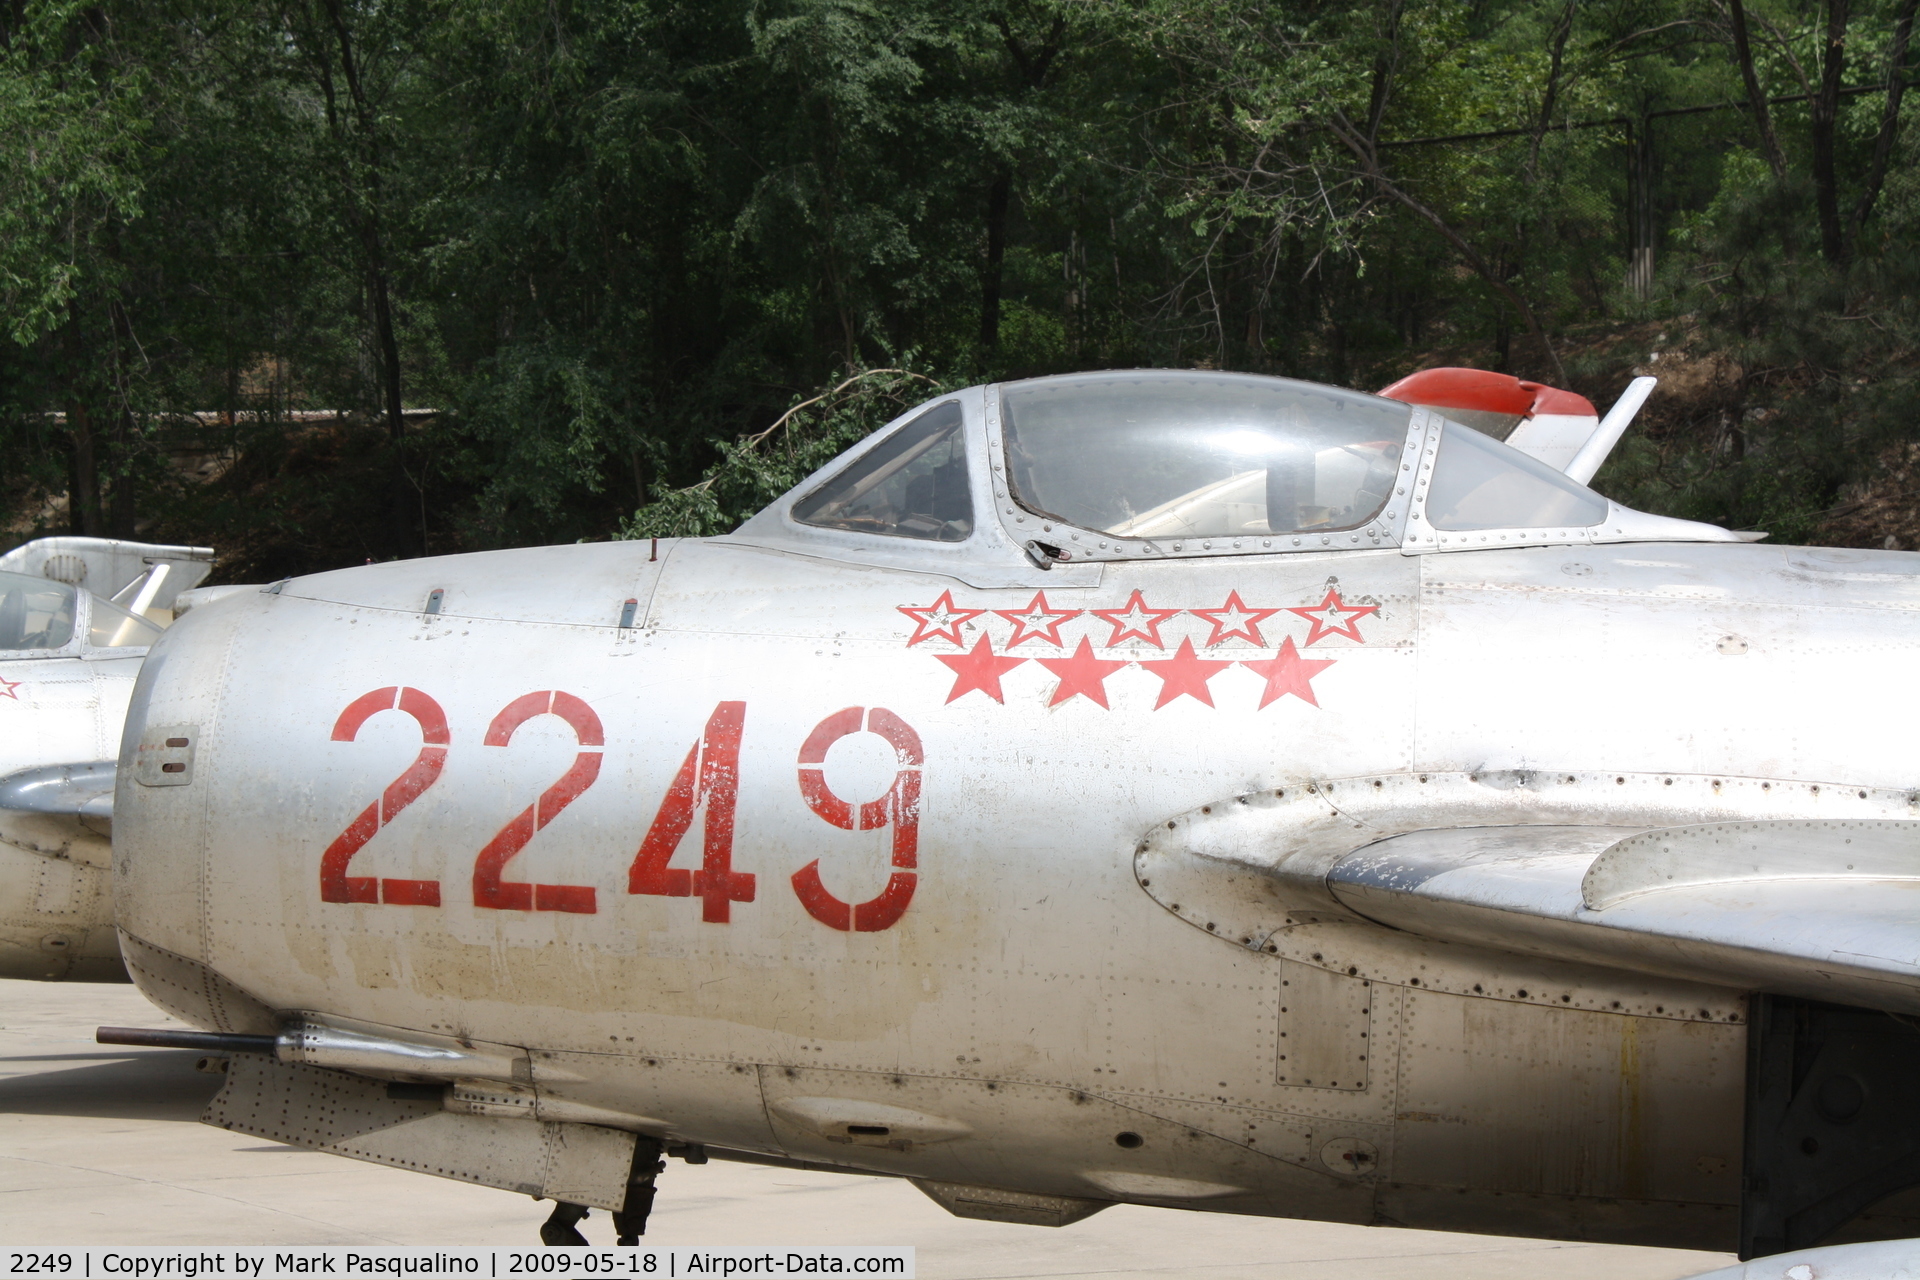 2249, Mikoyan-Gurevich MiG-15 C/N Not found 2249, MiG-15  Located at Datangshan, China